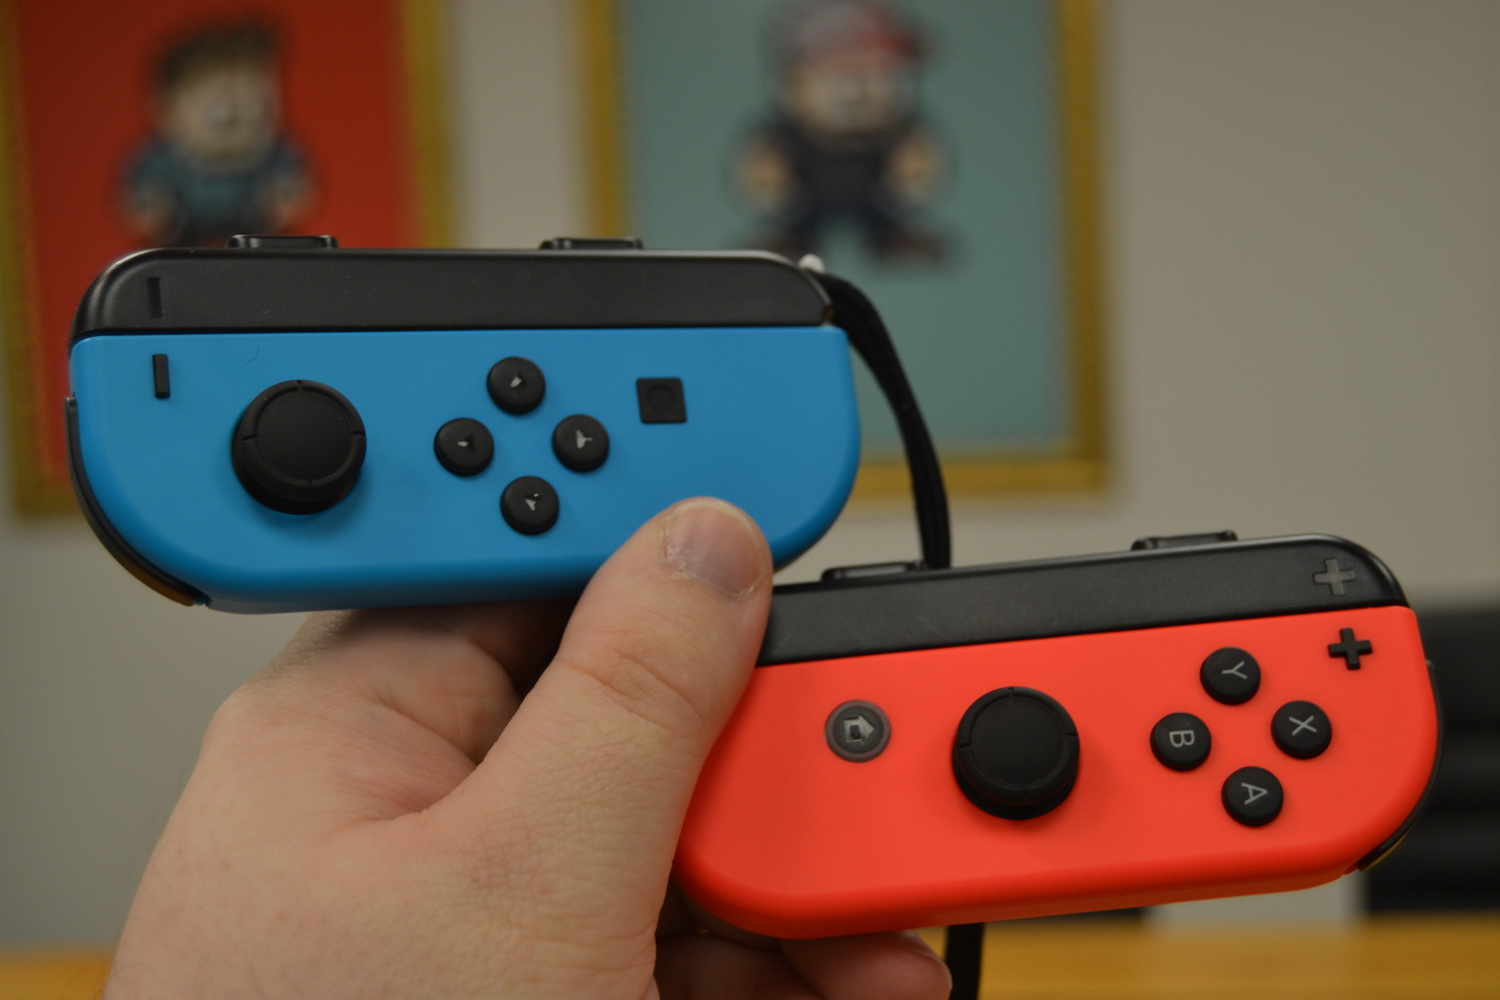 Nintendo Switch Joy-Cons Can Connect To Your PC, Mac, And Android - GameSpot